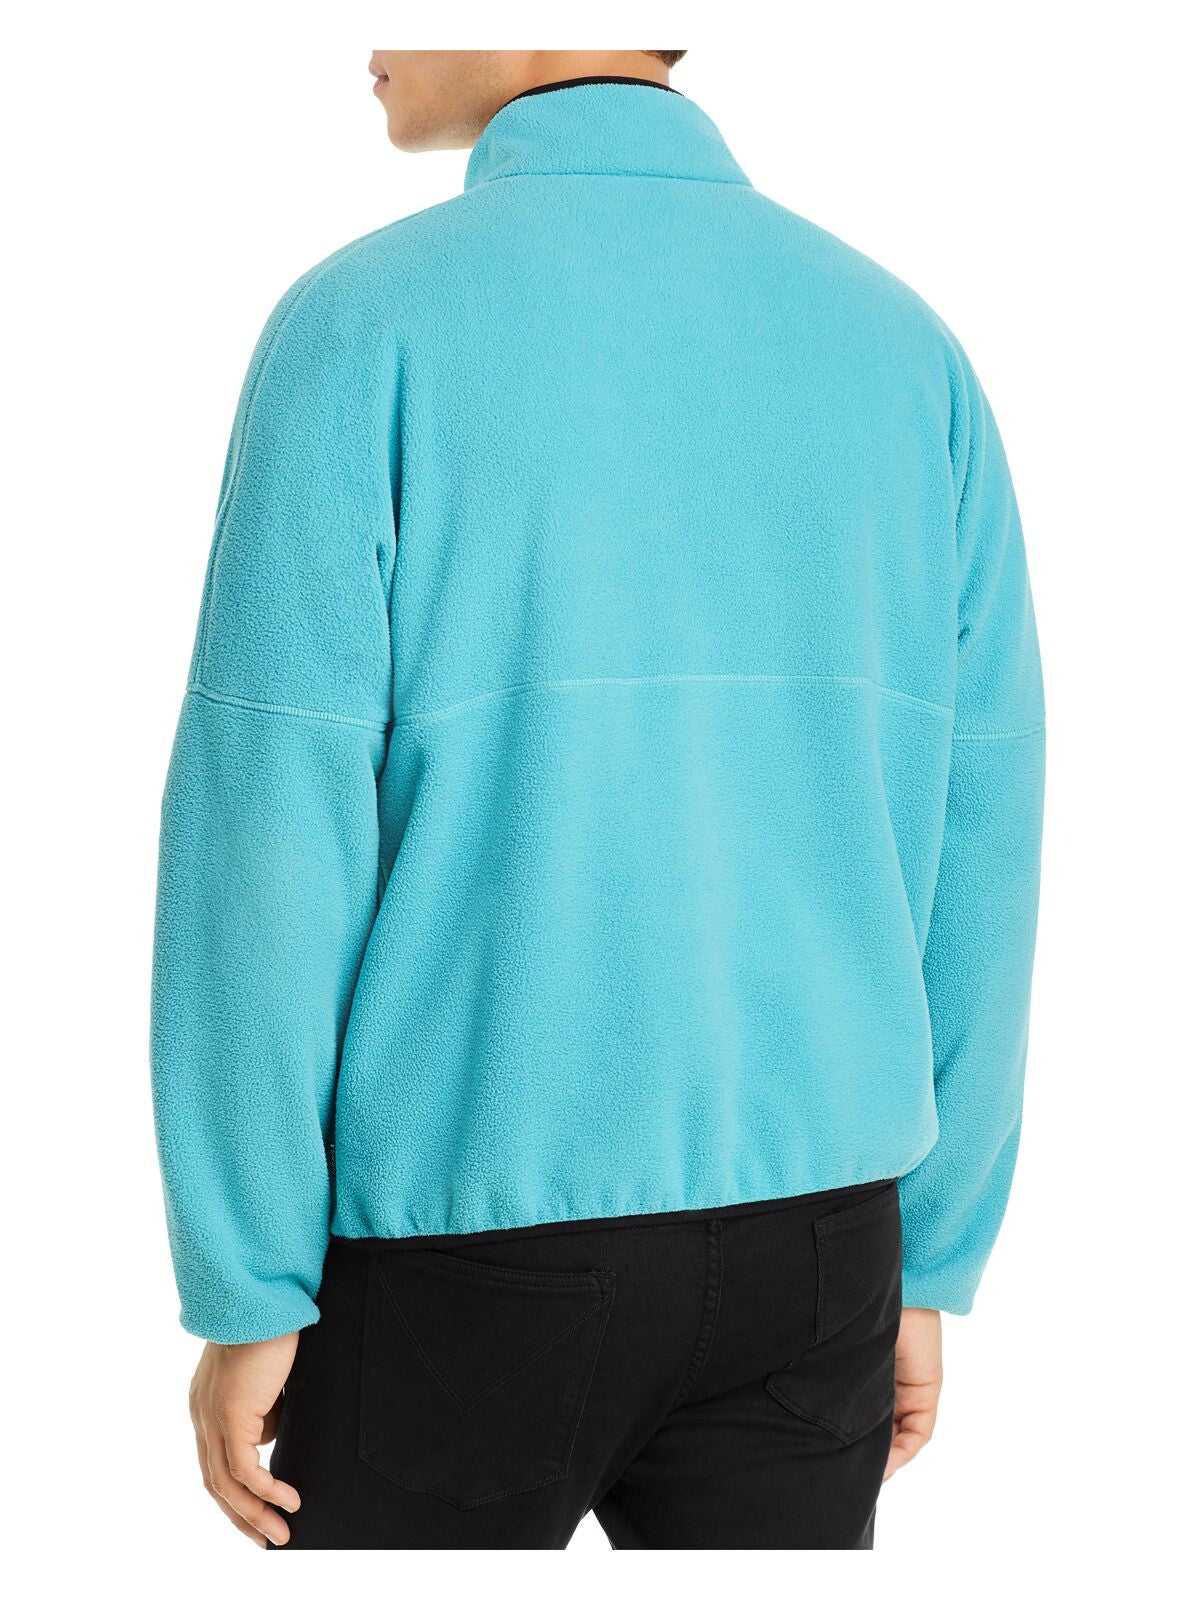 PENFIELD Mens Turquoise Classic Fit Quarter-Zip Fleece Pullover Sweater S